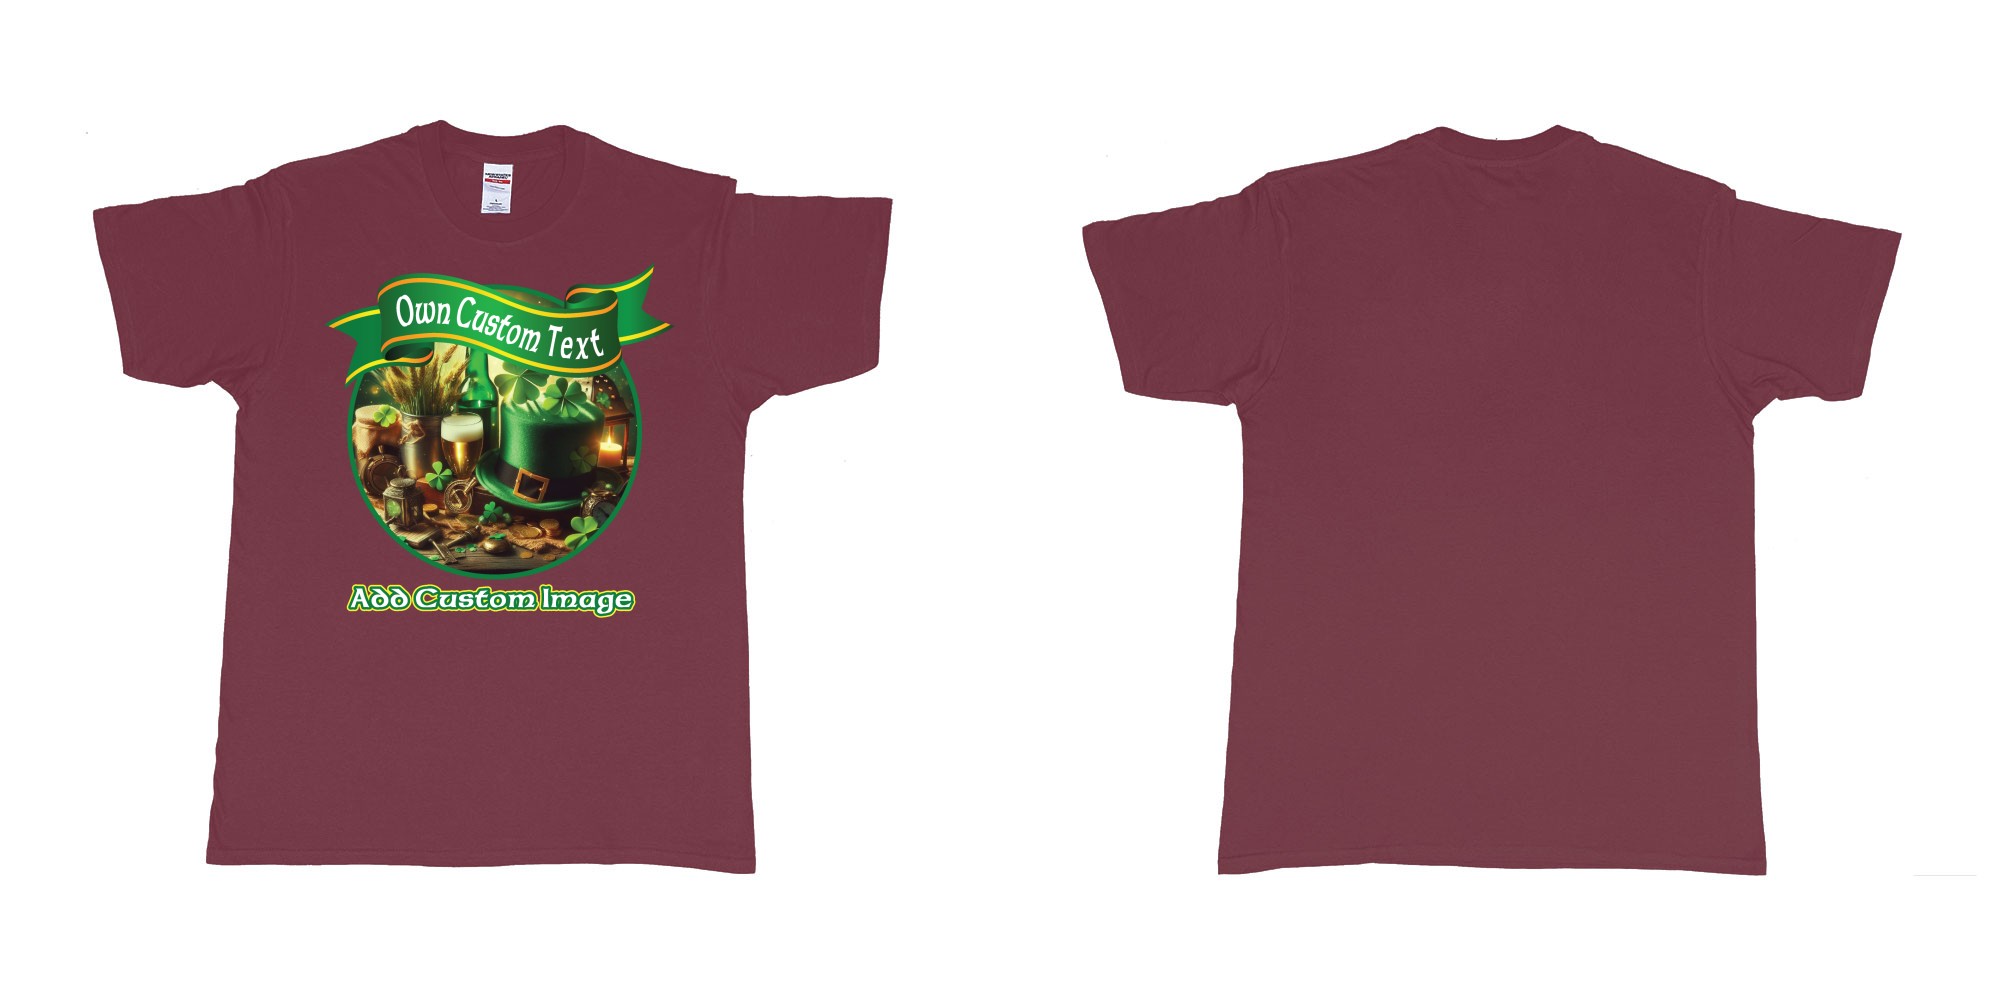 Custom tshirt design st patricks day four leaf clover custom printing in fabric color marron choice your own text made in Bali by The Pirate Way